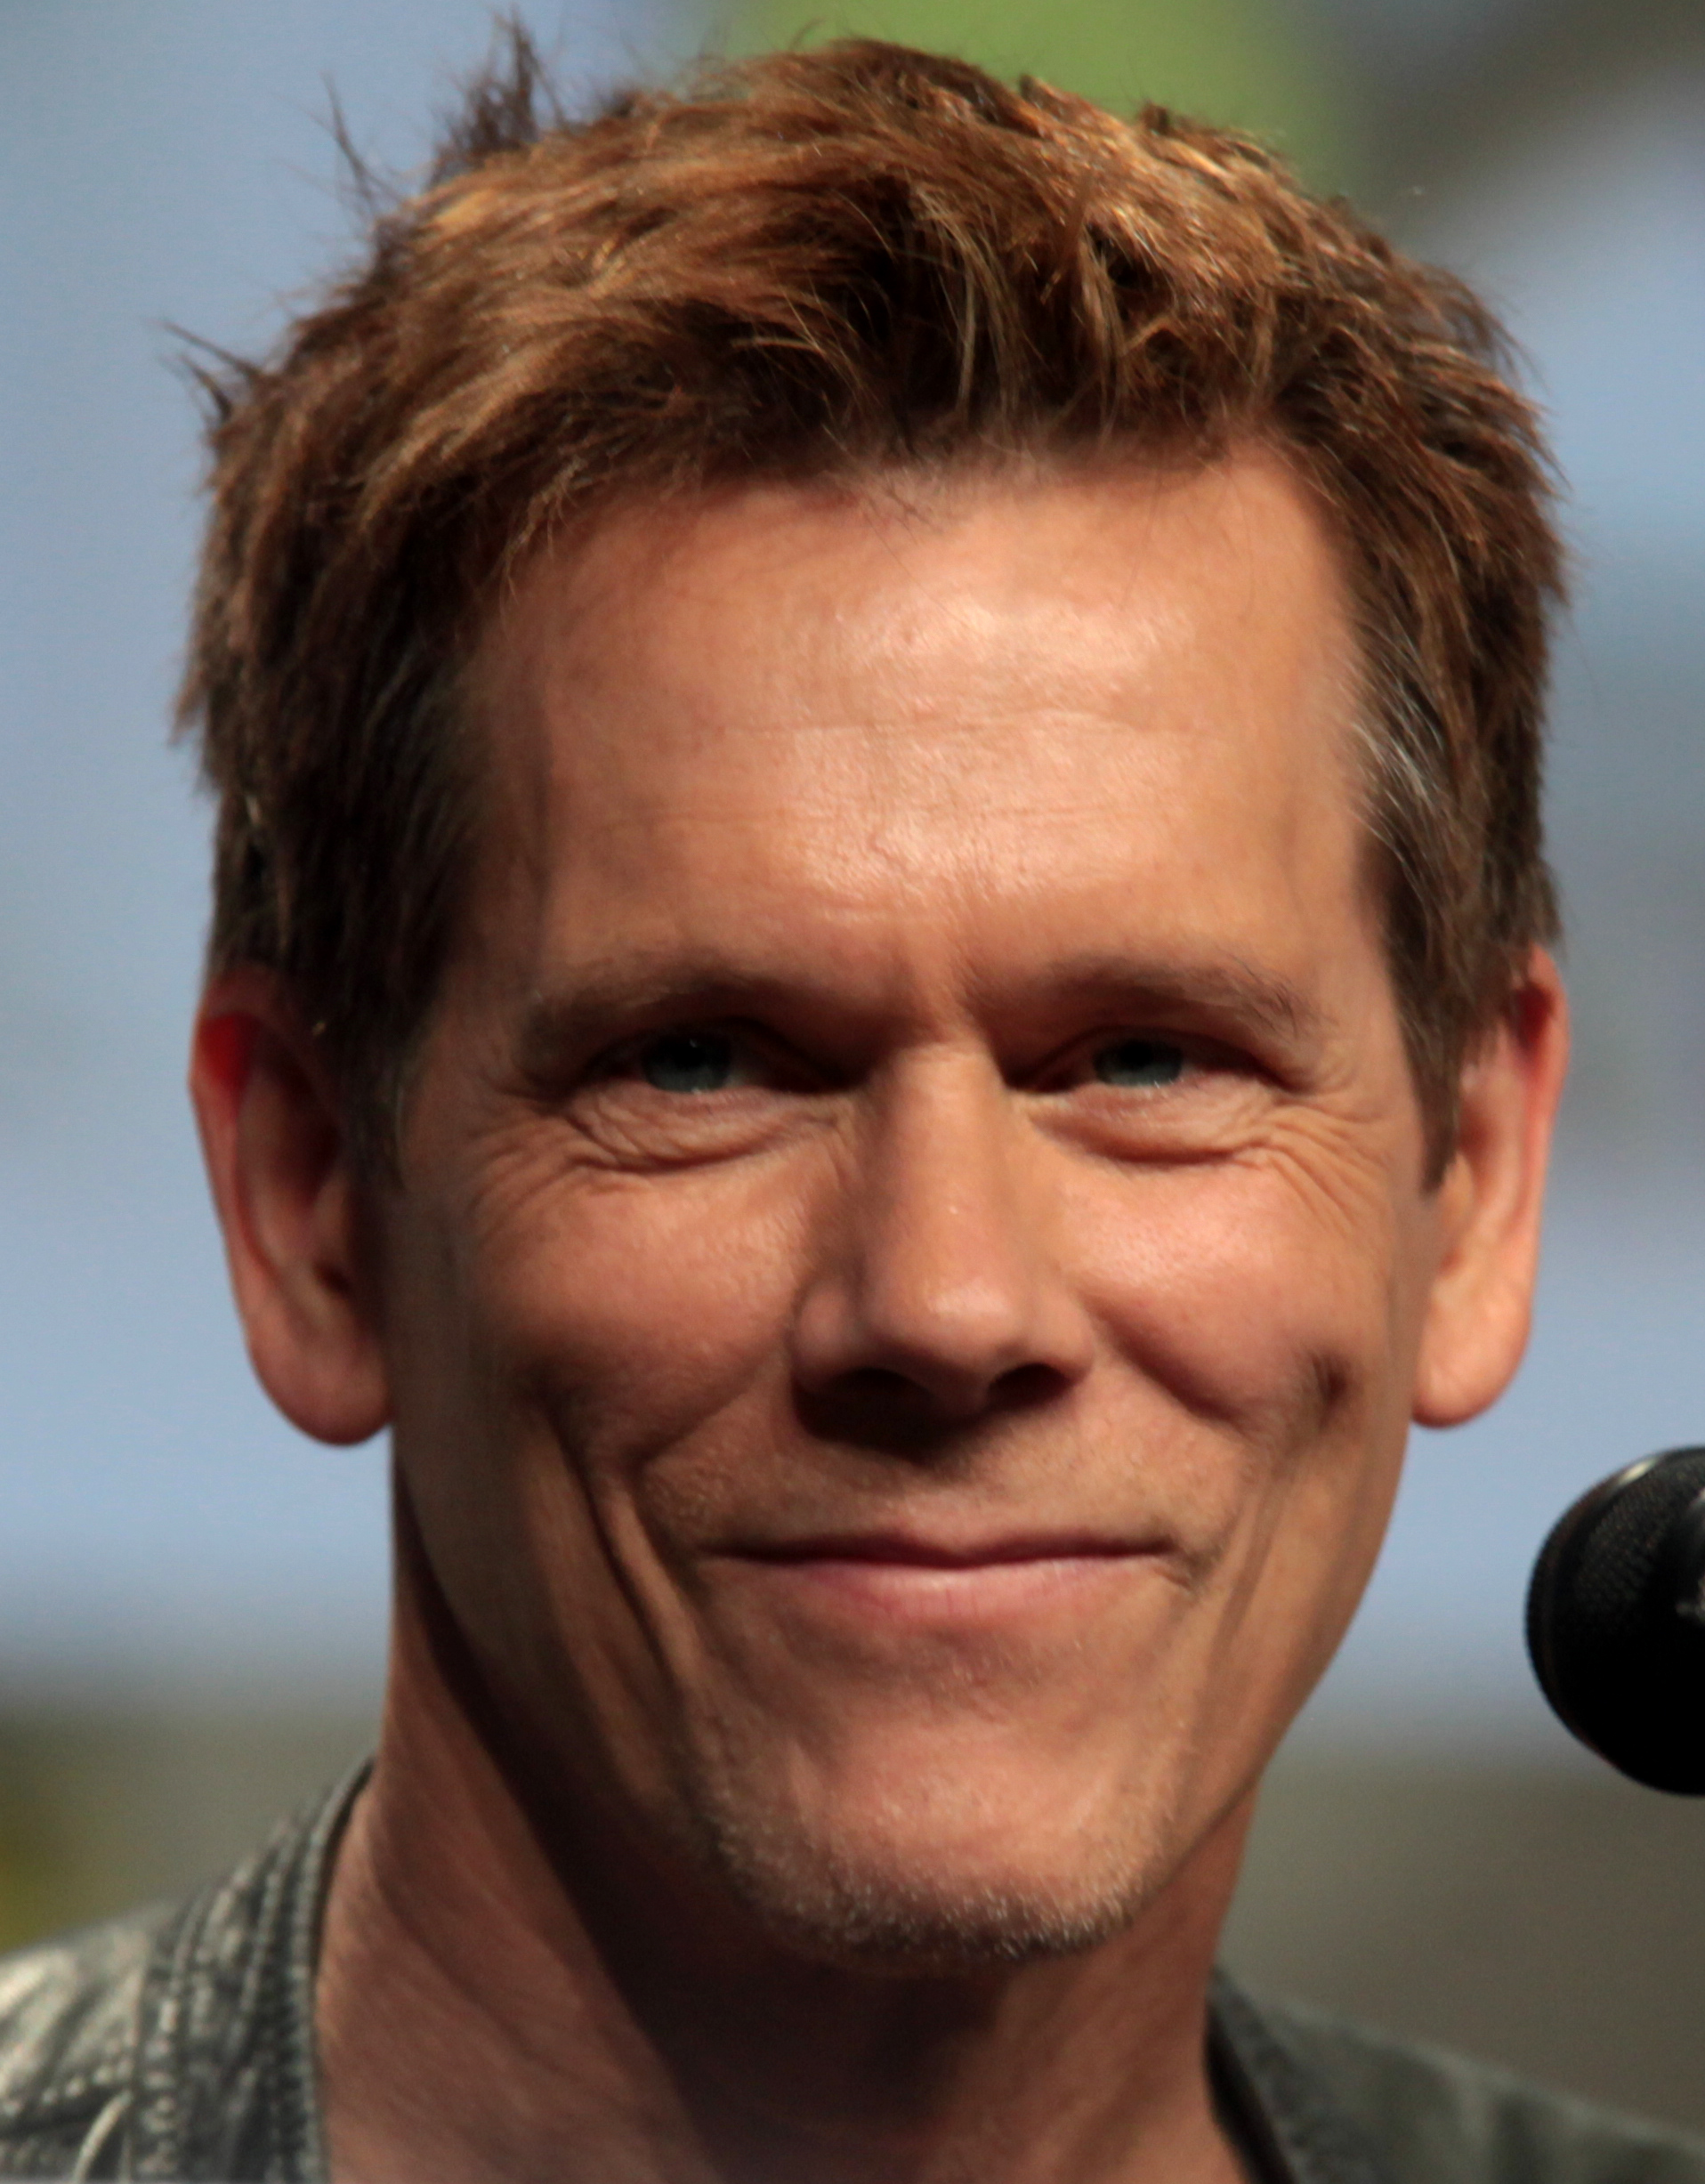 Friday Video: The six degrees: Kevin Bacon at TEDxMidwest